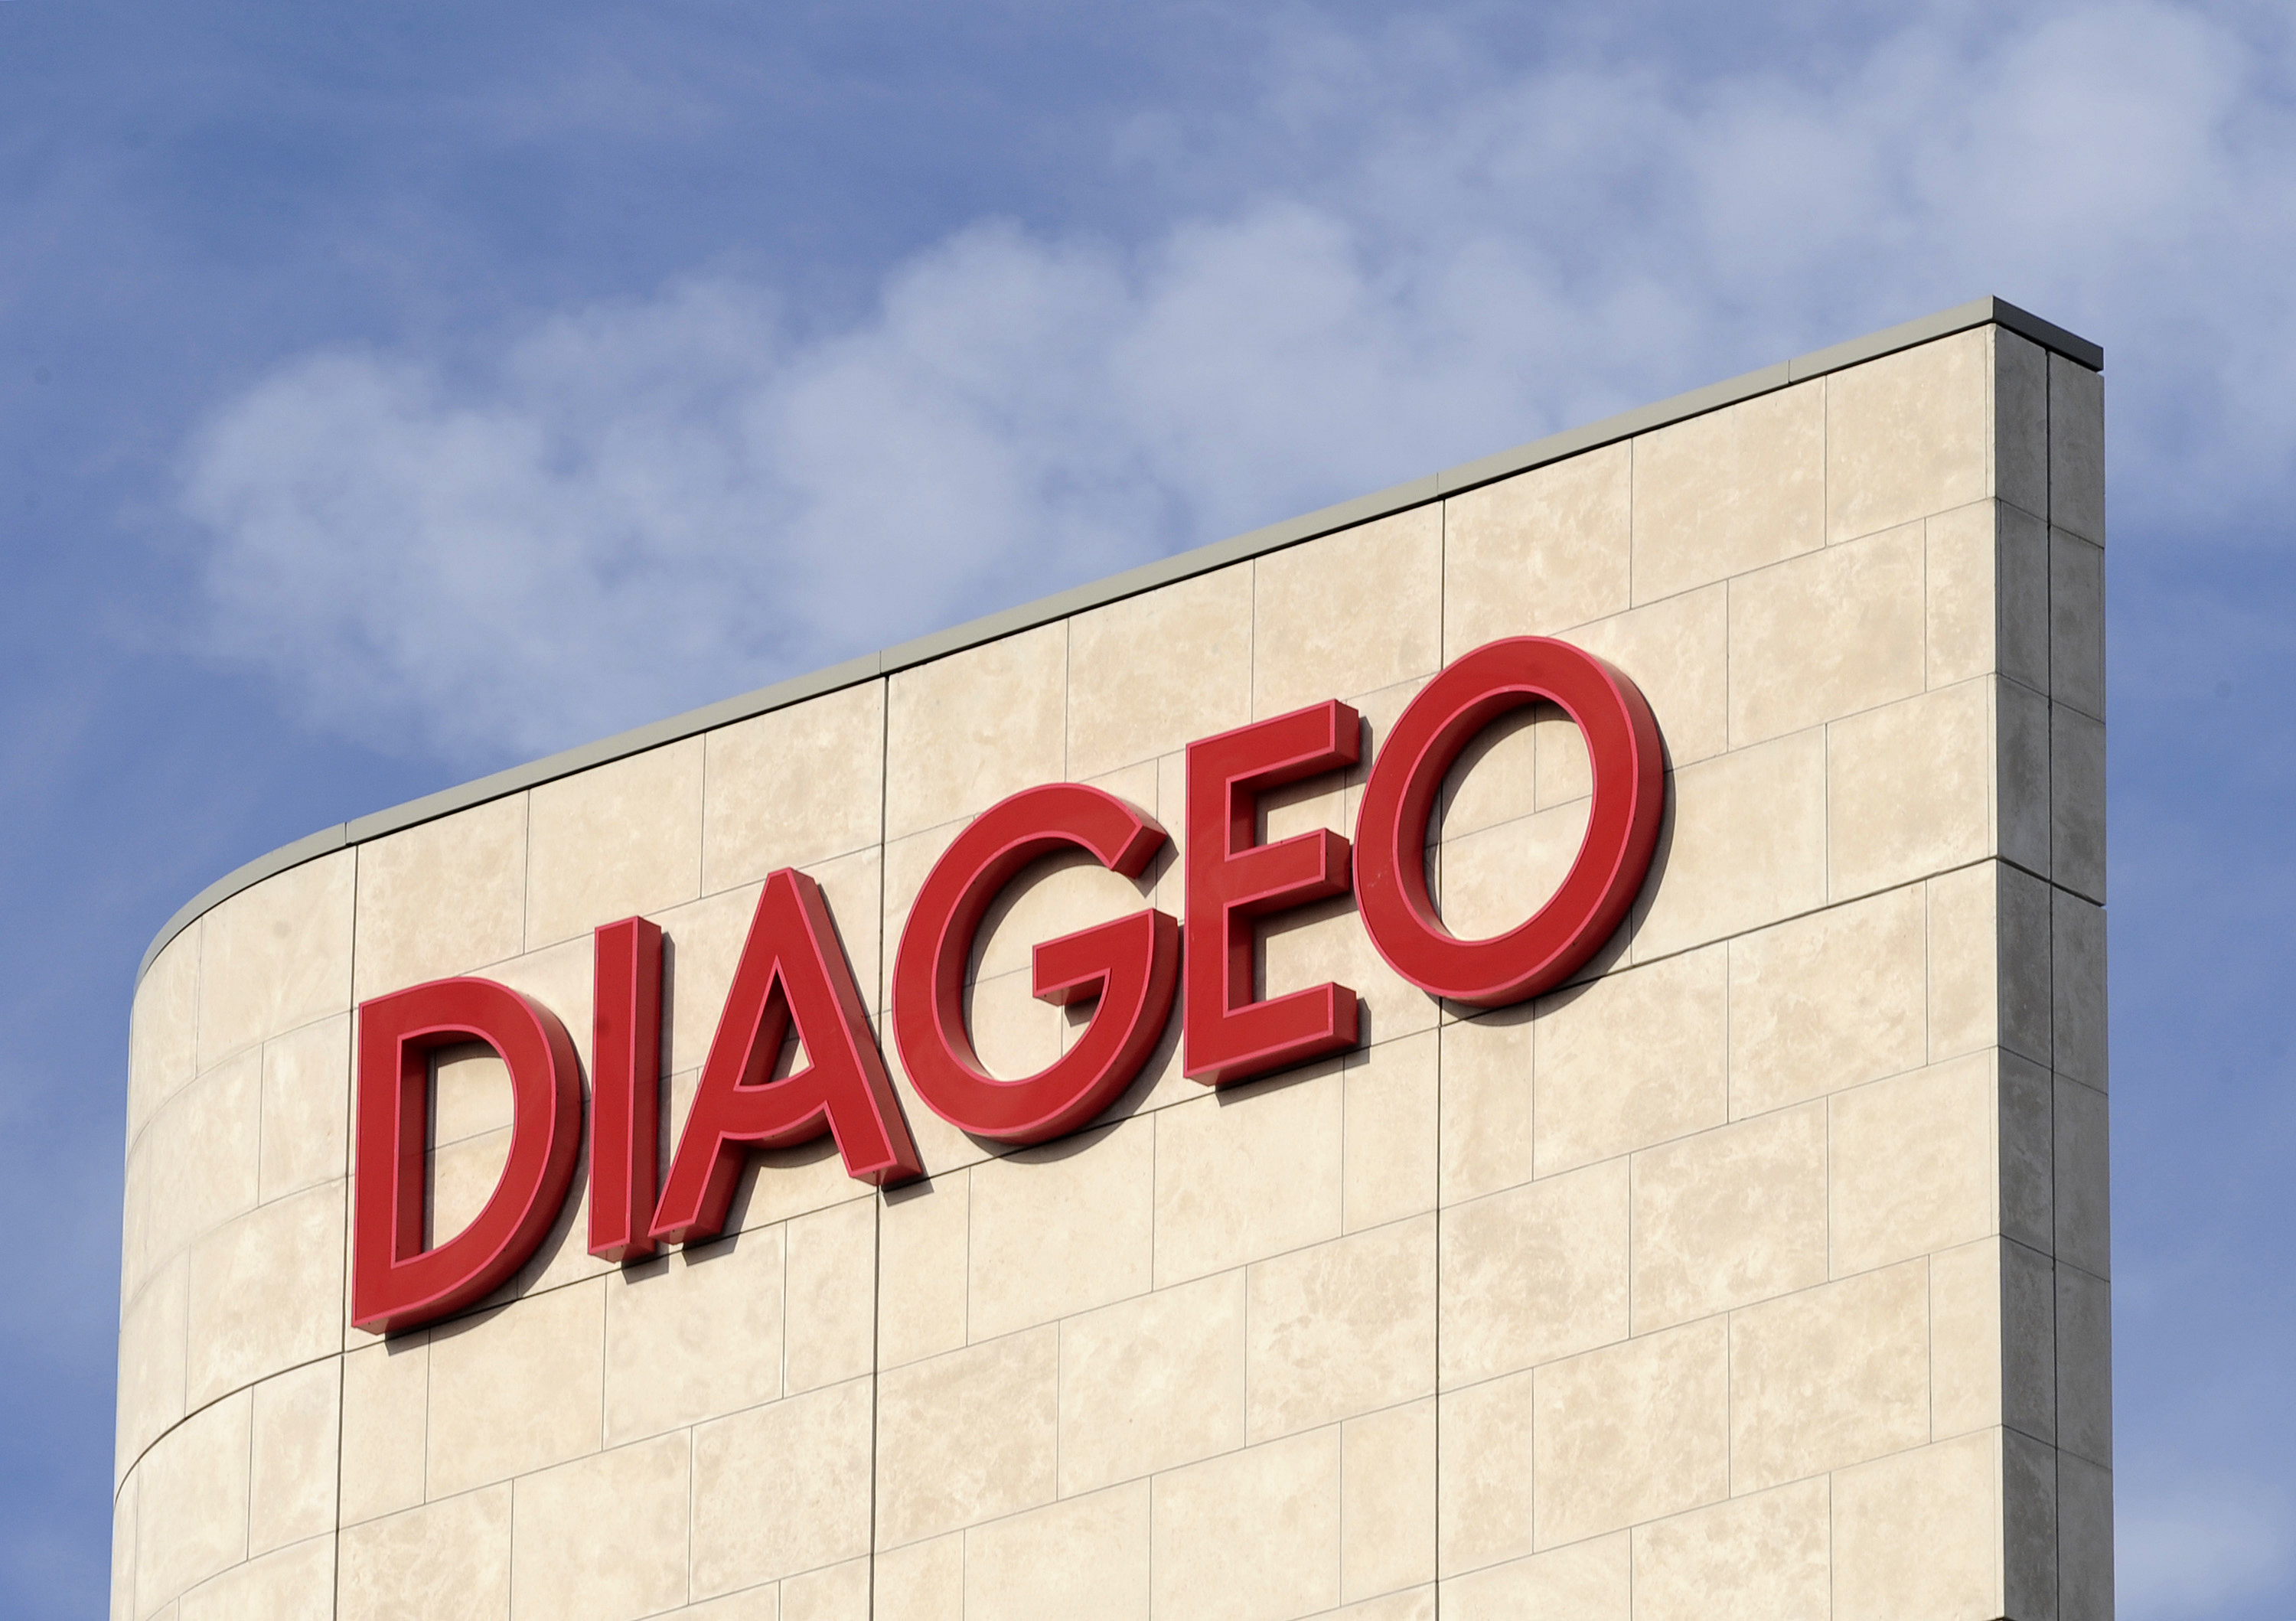 Signage is seen on the outside of Diageo offices in west London